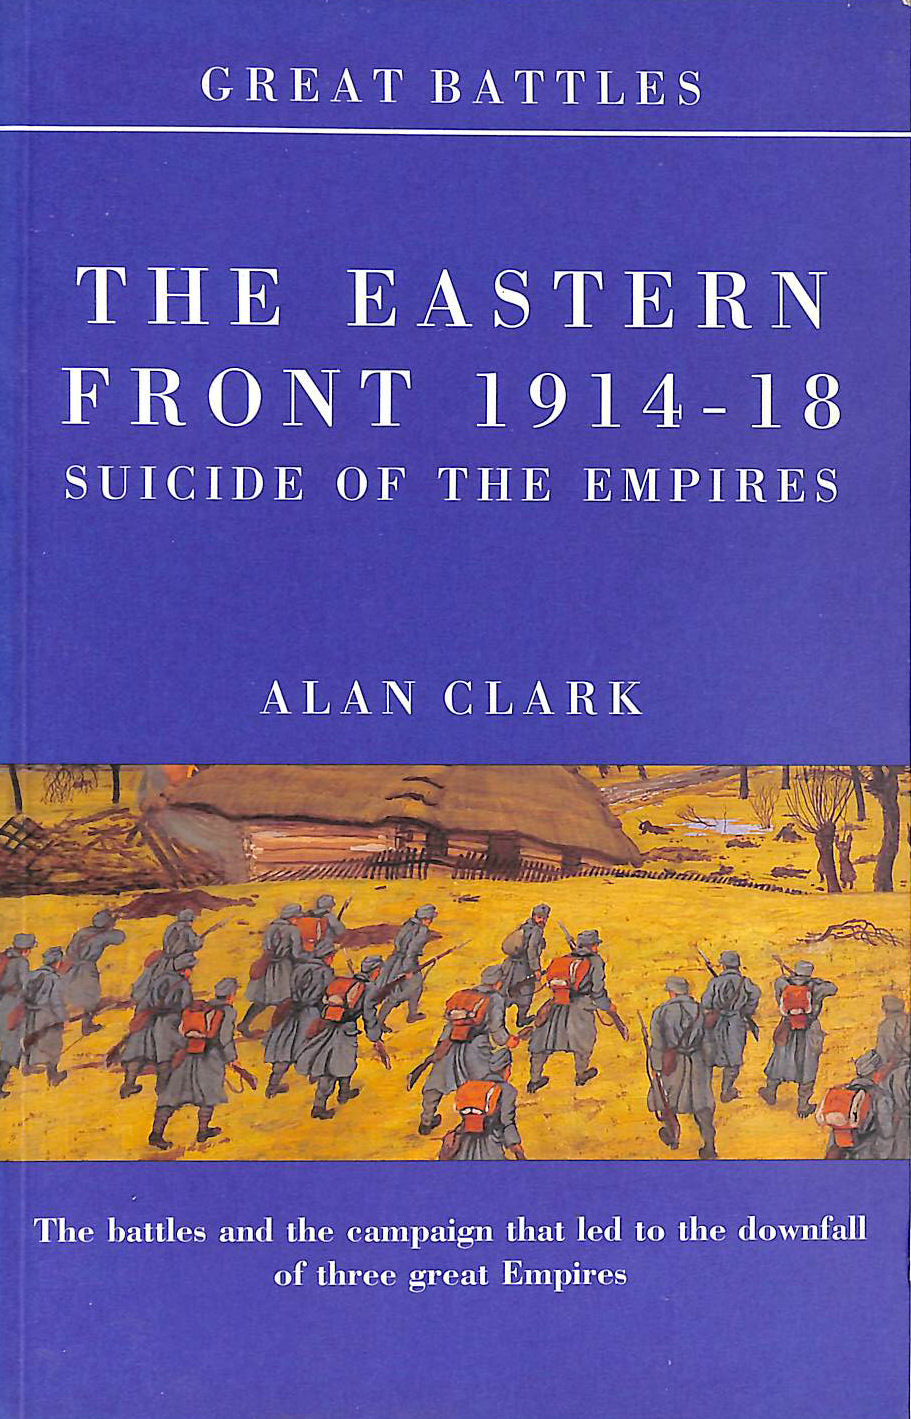 CLARK, ALAN - Great Battles: The Eastern Front 1914-18: Suicide Of The Empires